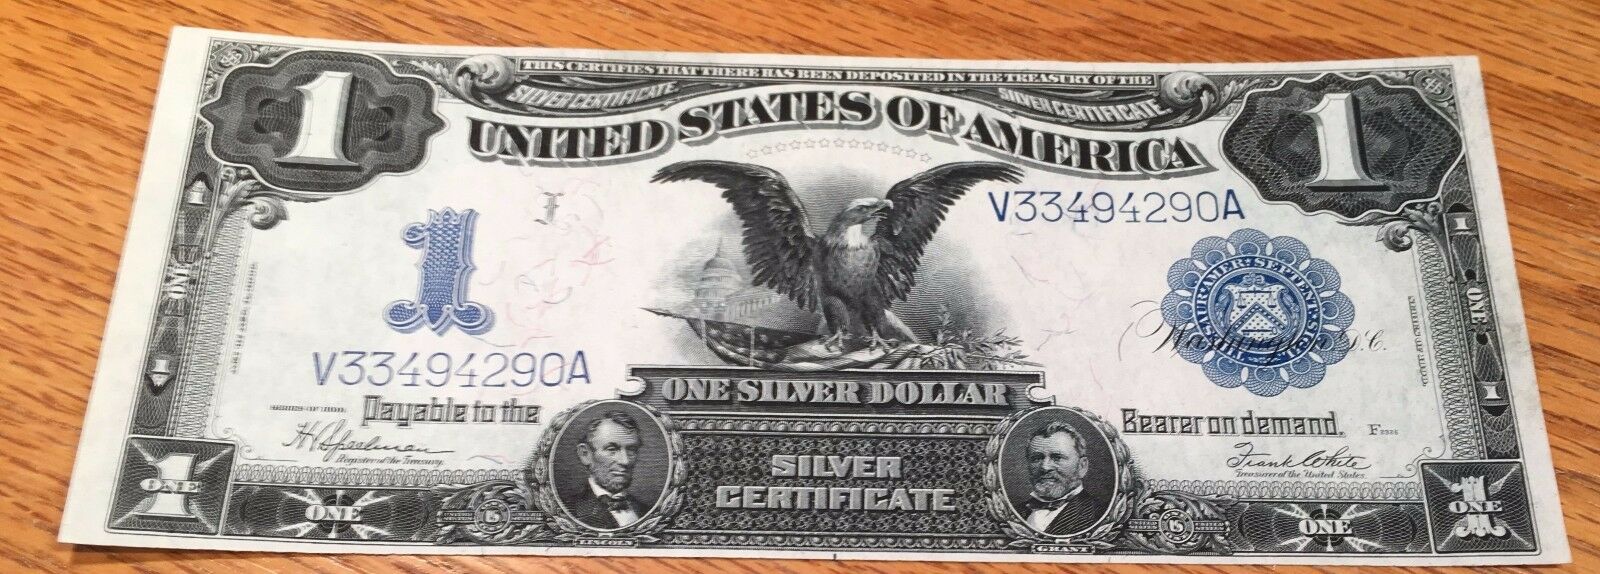 1899 $1 SILVER CERTIFICATE Speelman and White Signatures #290A